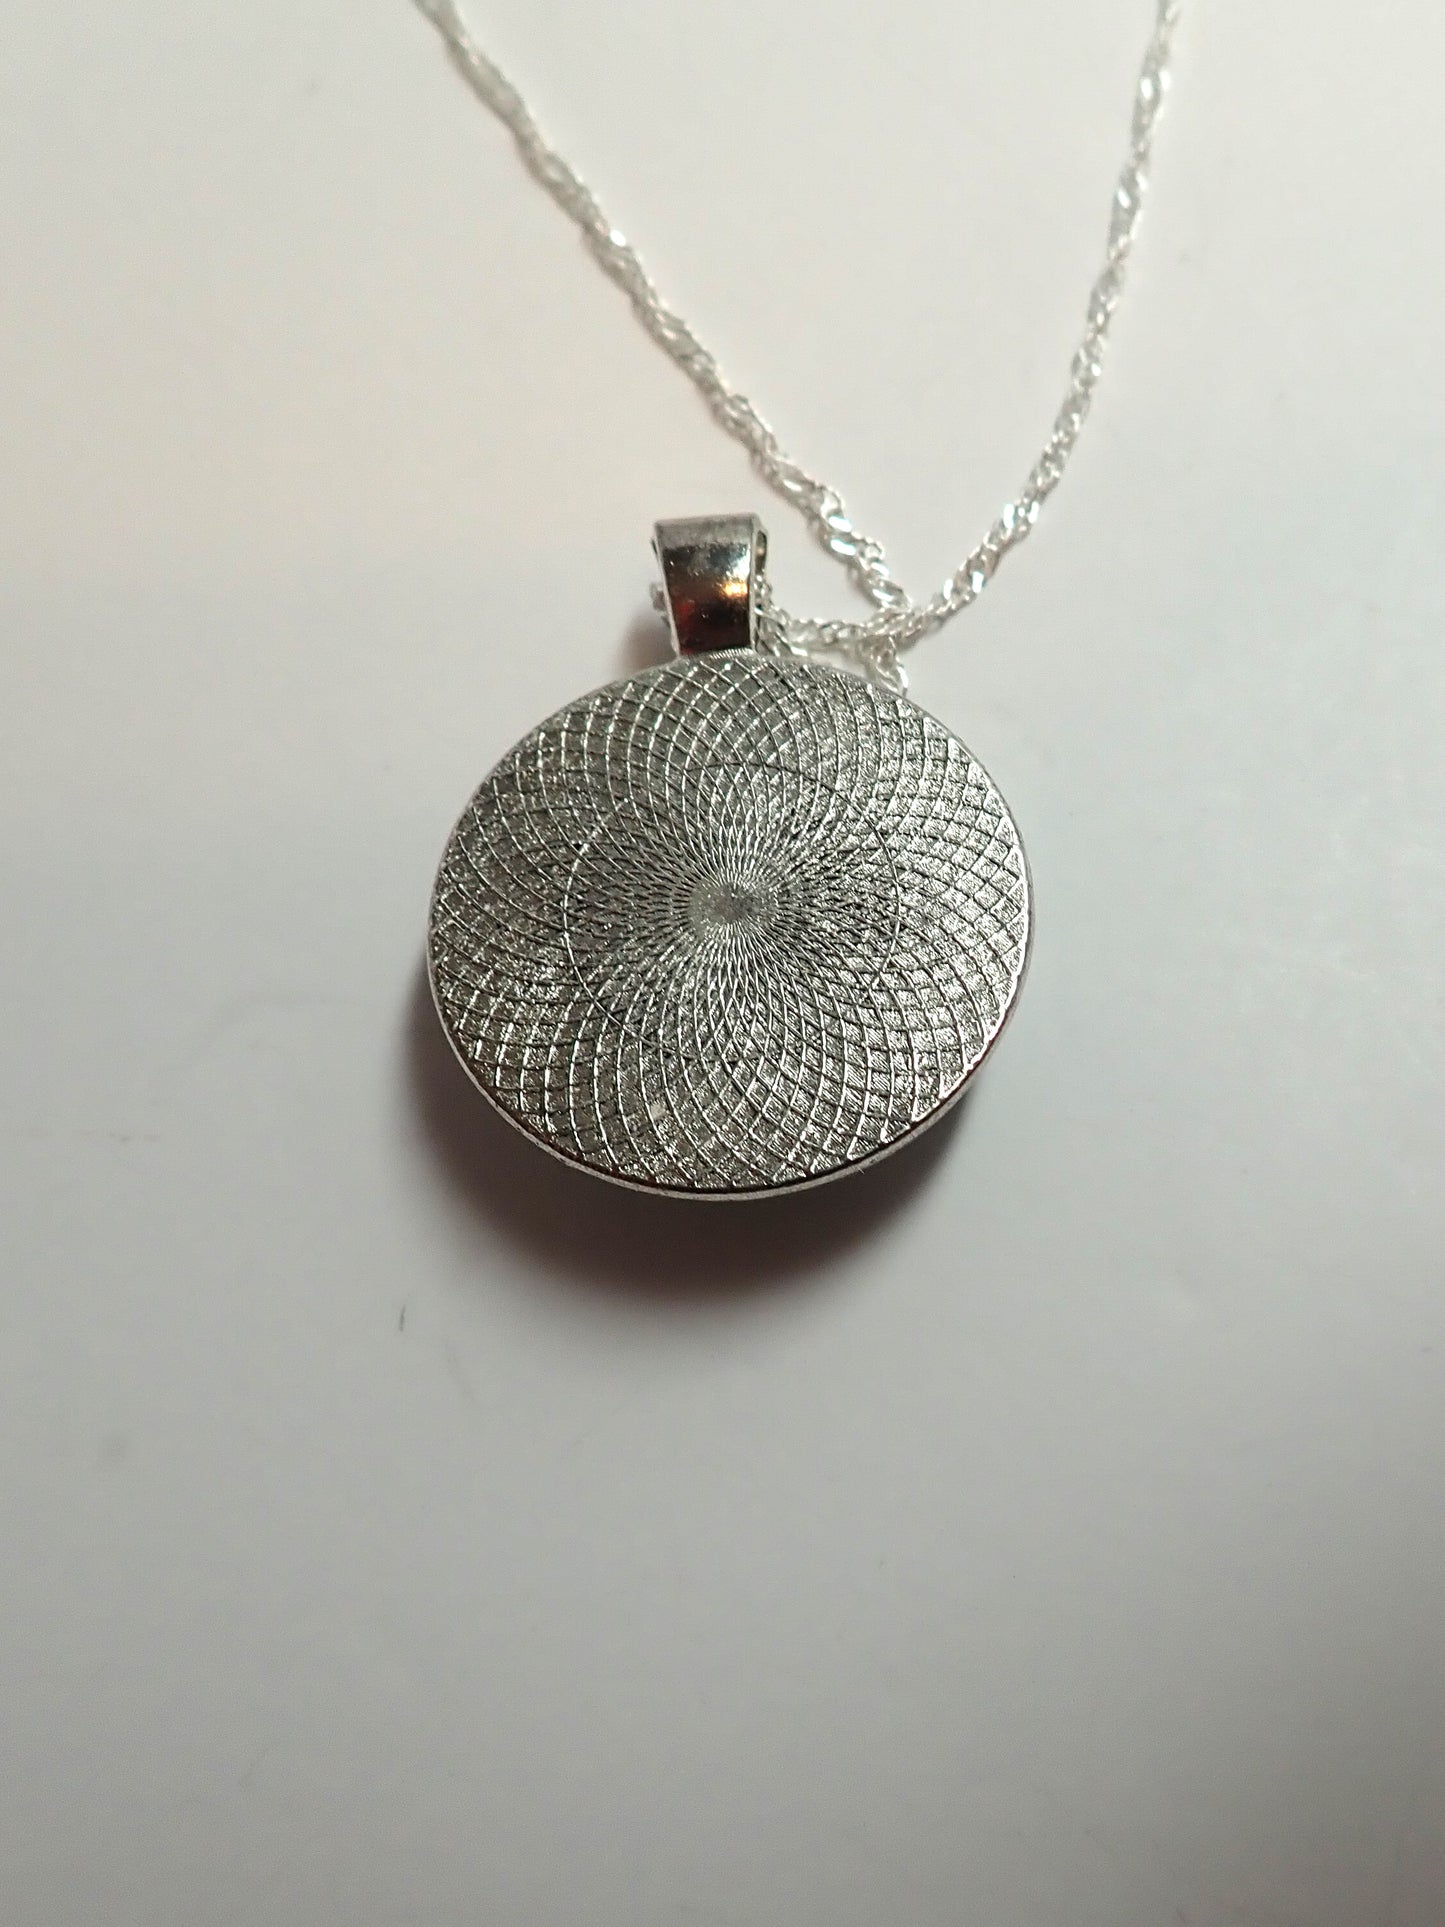 Jewelry, necklace, round, circle, acrylic, silver tone, twisted silver chain, gift